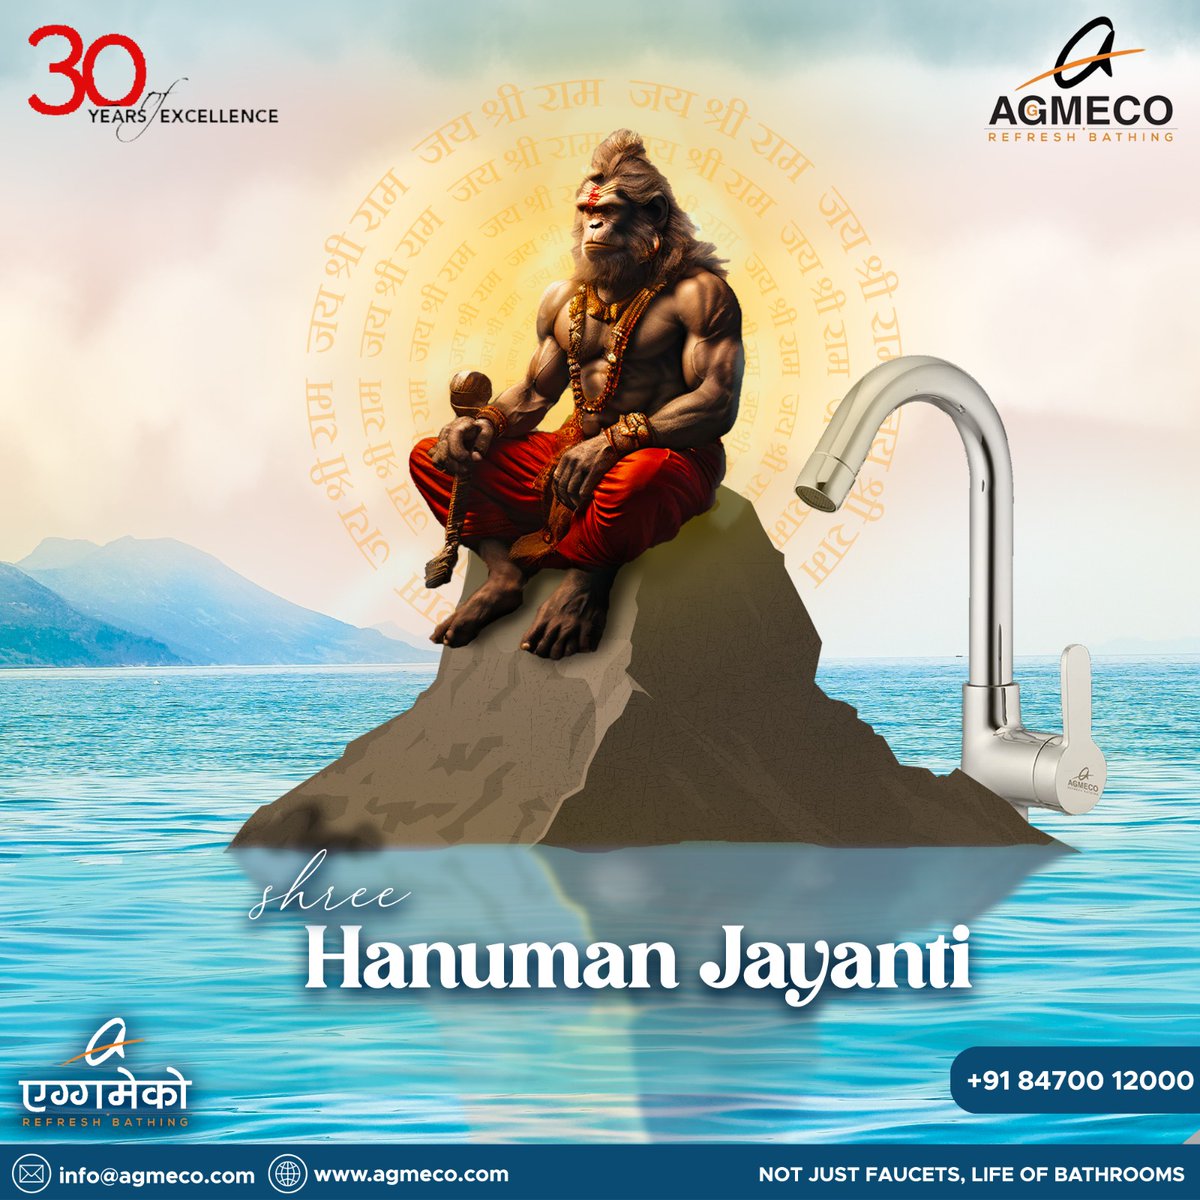 Let us celebrate the birth of Lord Hanuman,
who embodies courage, devotion, and selflessness.
Happy Hanuman Jayanti!'

linktr.ee/agmeco

#hanumanjayanti #hanumanjayanti2024 #hanumanji #hanumantemple #faucets #overheadshowers #bathaccessories #agmecofaucets #taps